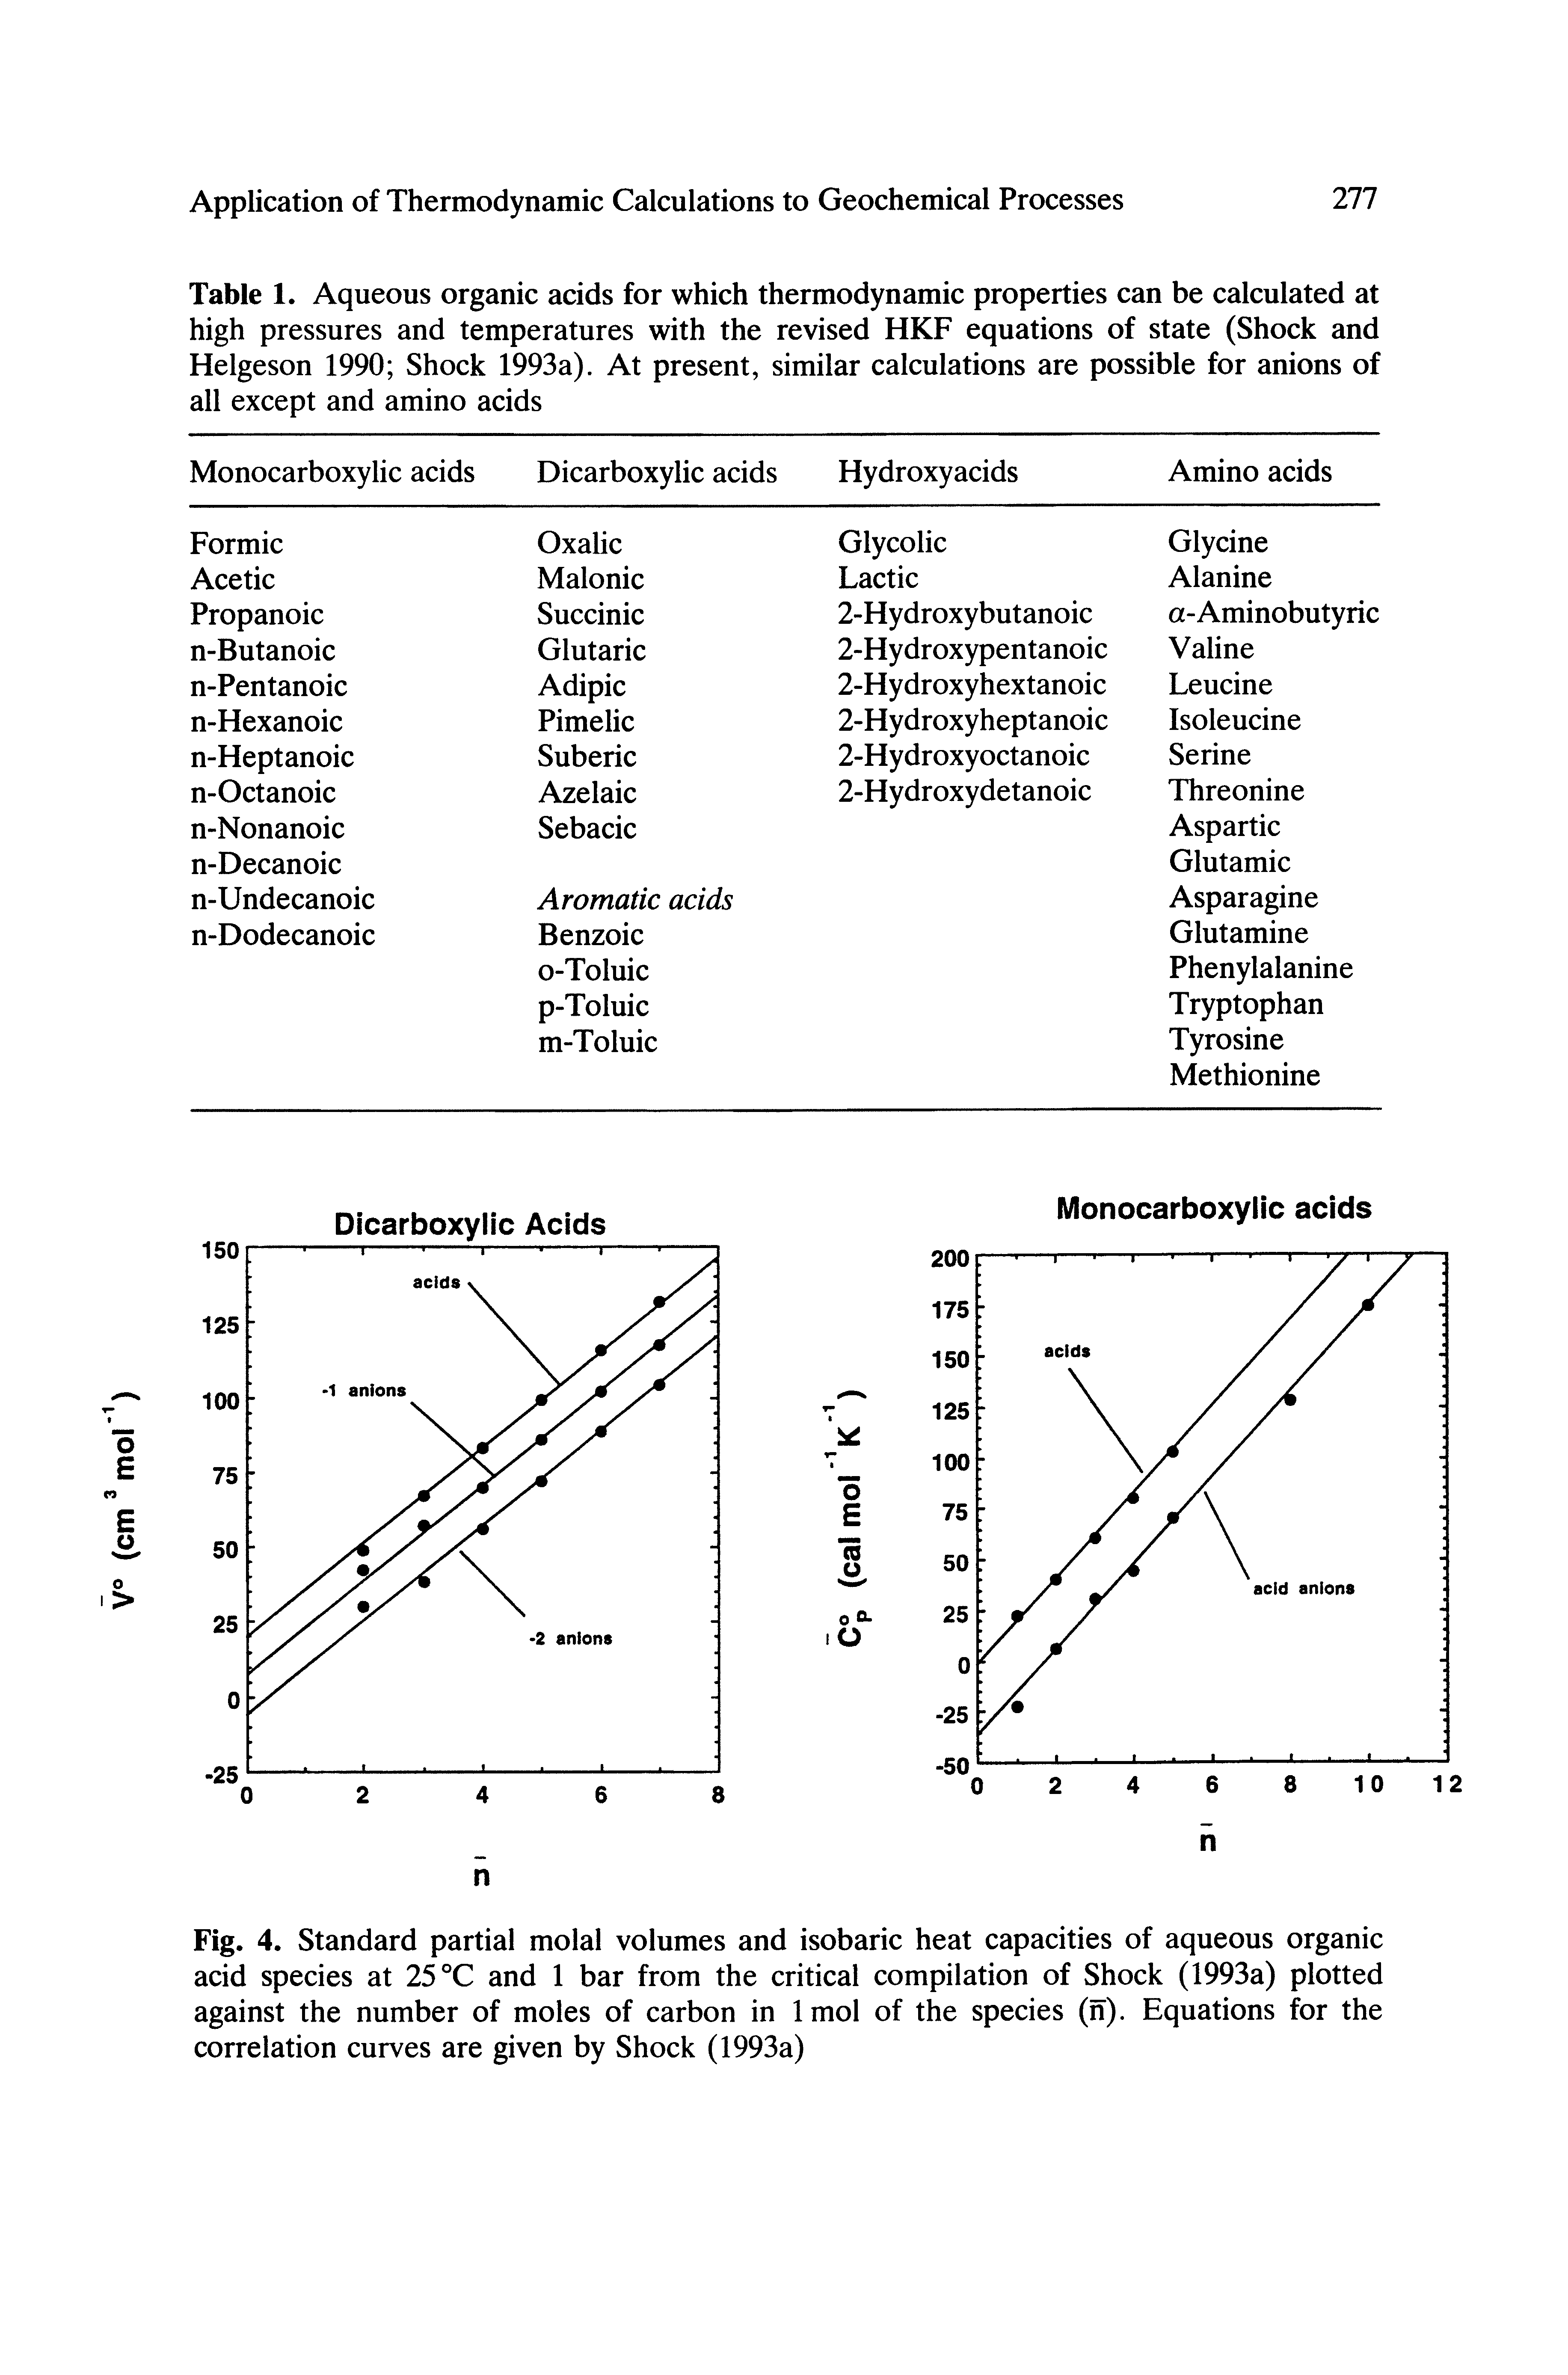 Fig. 4. Standard partial molal volumes and isobaric heat capacities of aqueous organic acid species at 25 °C and 1 bar from the critical compilation of Shock (1993a) plotted against the number of moles of carbon in Imol of the species (h). Equations for the correlation curves are given by Shock (1993a)...